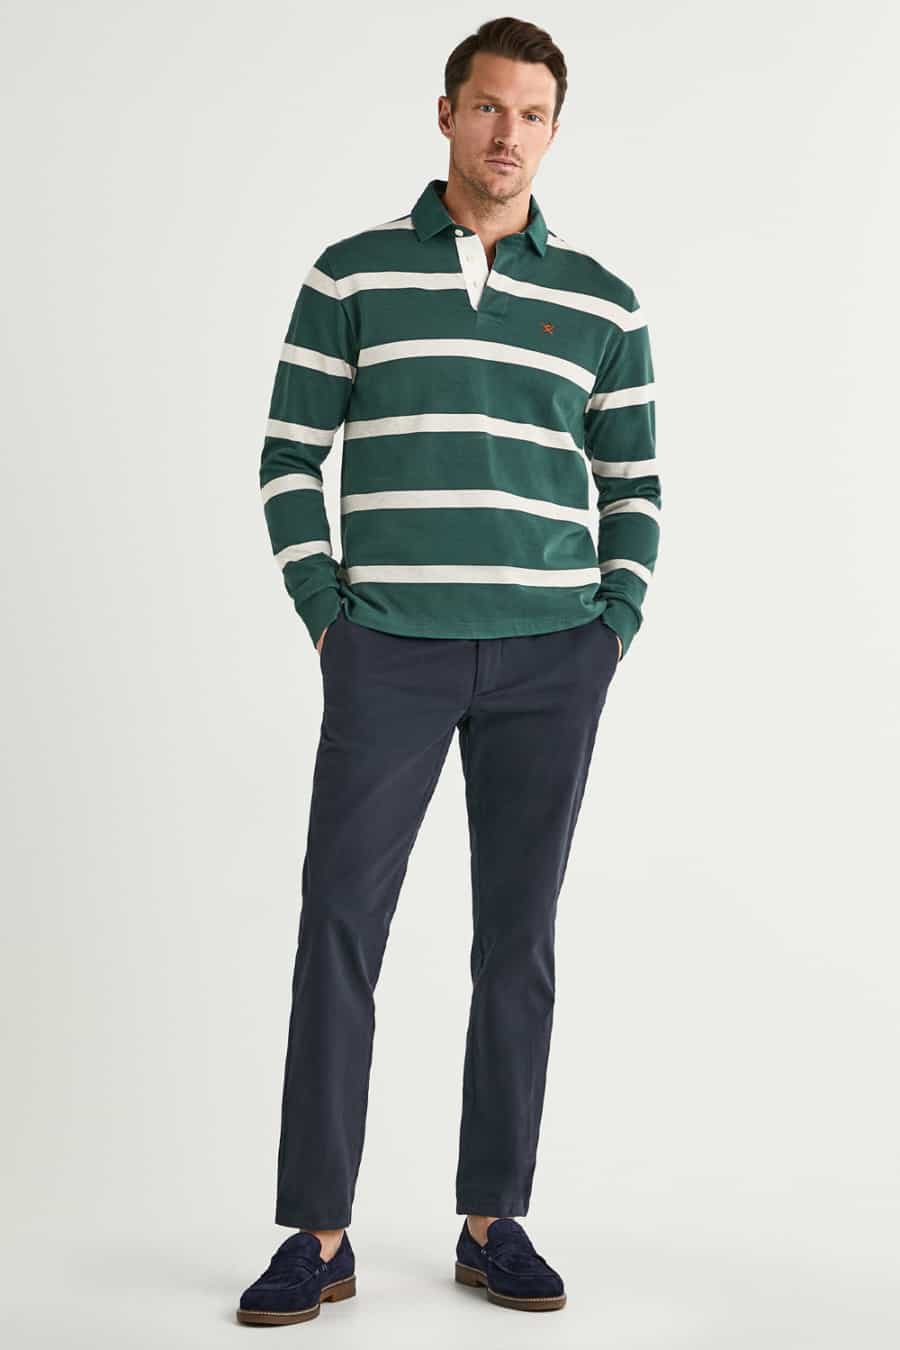 Men's preppy rugby shirt with chinos and loafers outfit